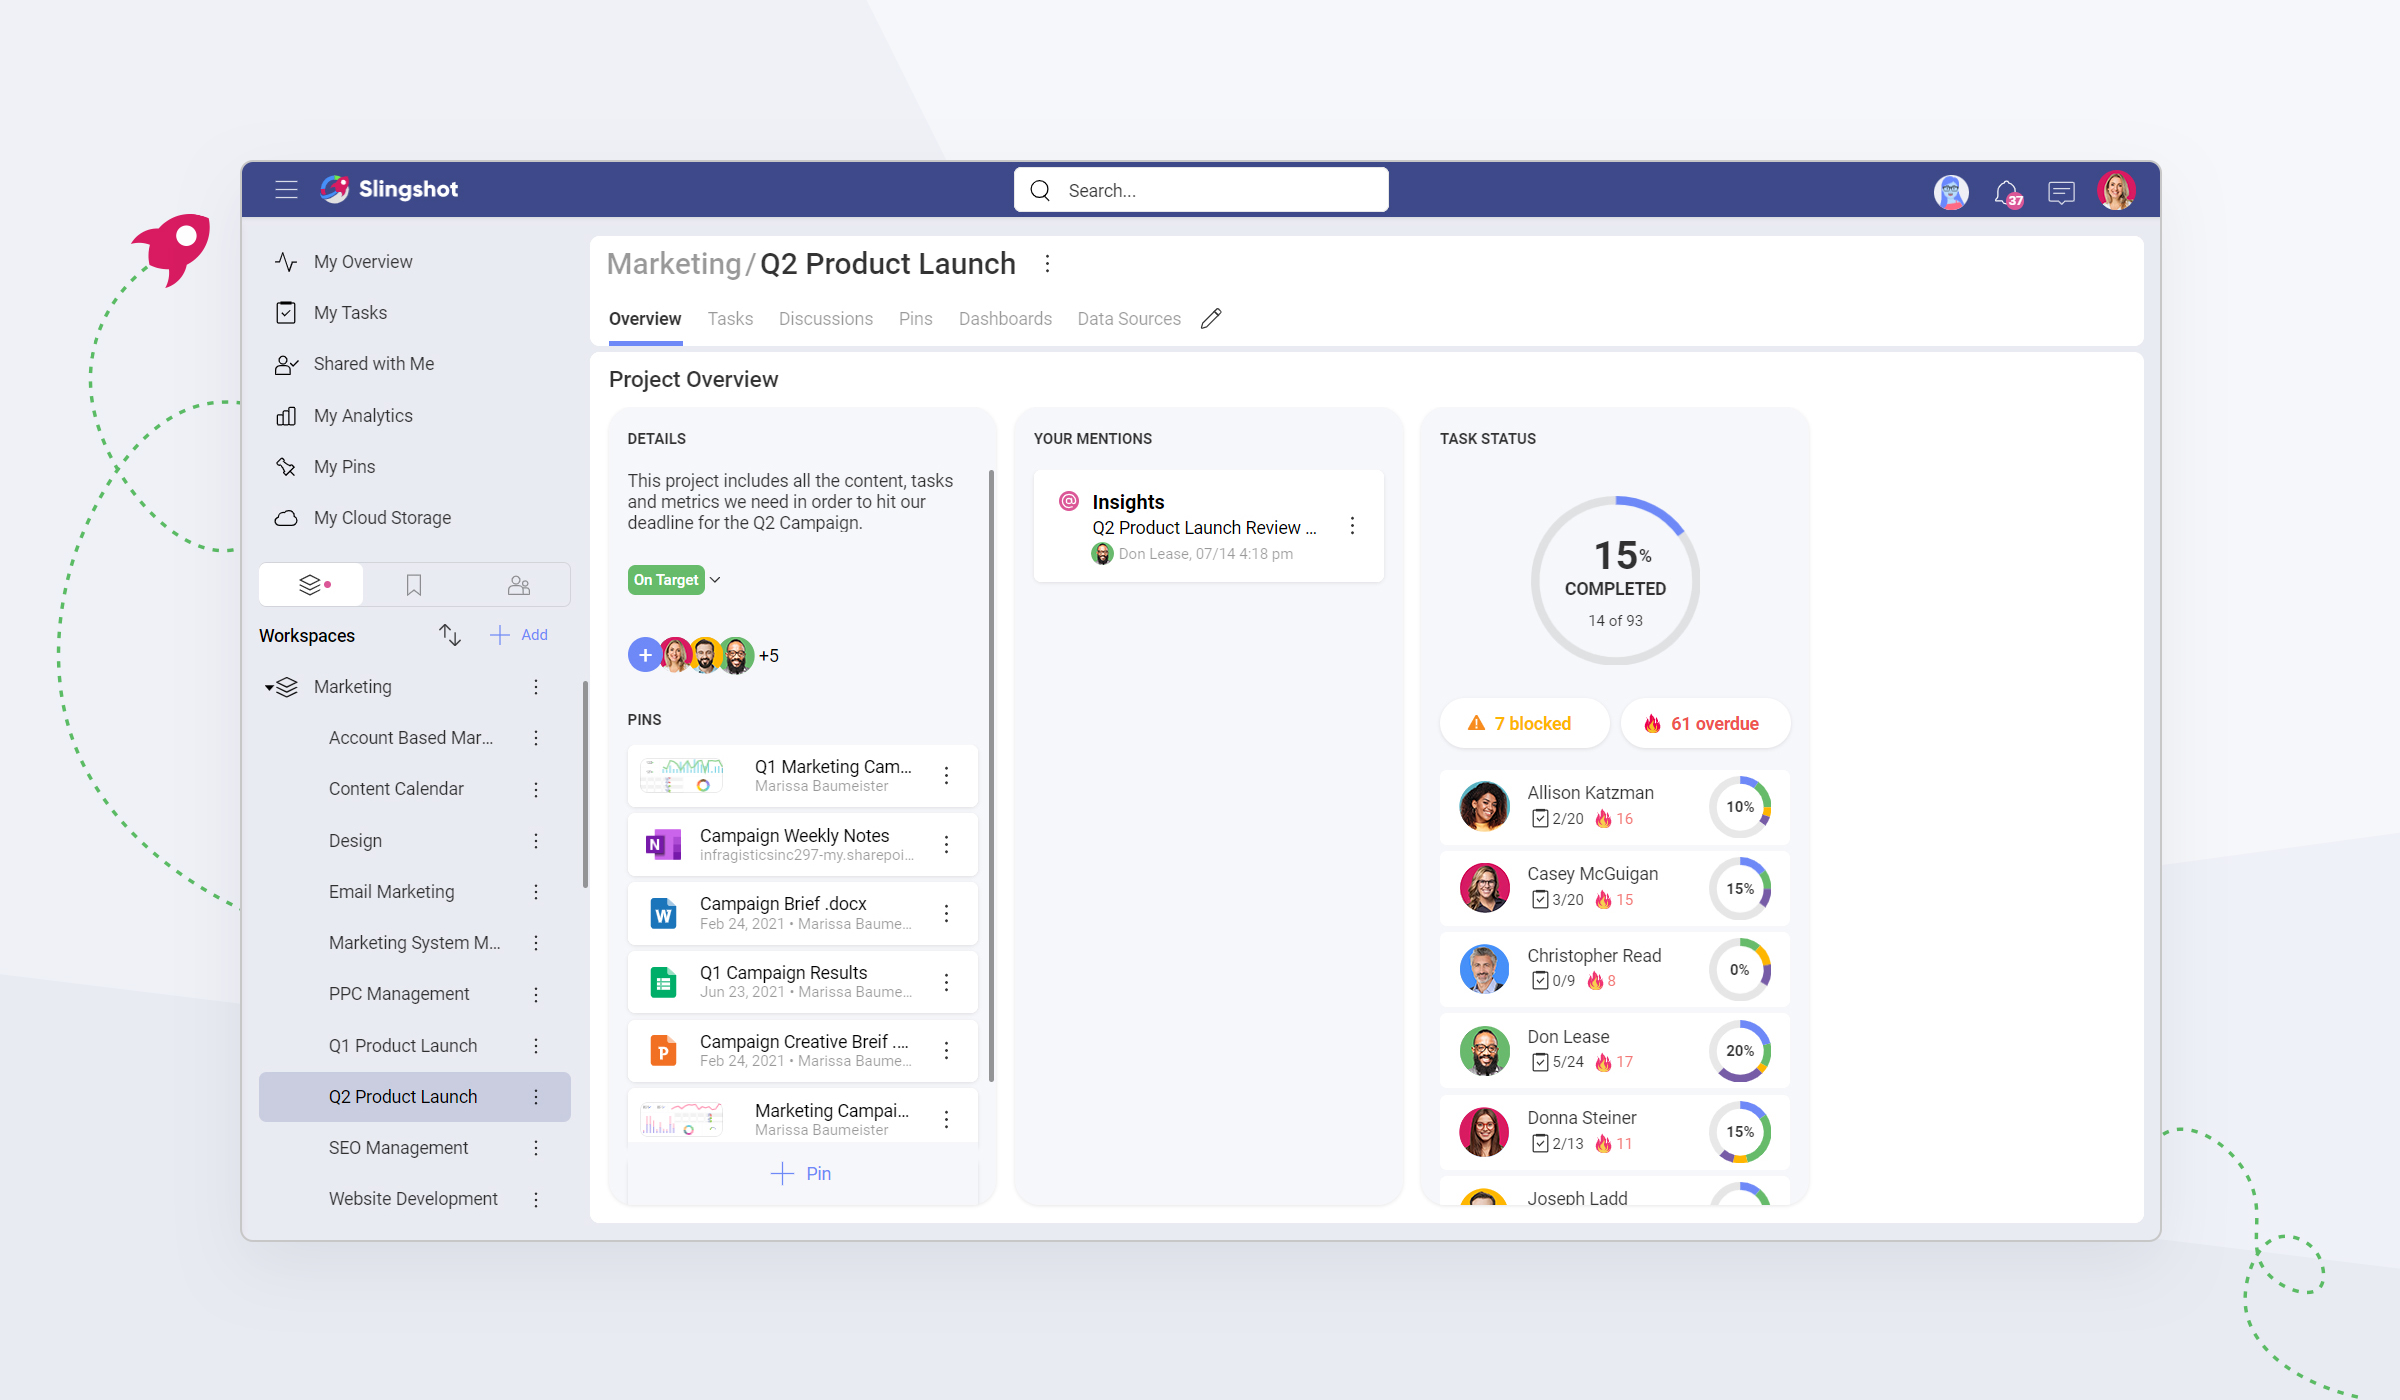 Keep track of everything from beginning to end with an easy-to-use solution that provides a digital workplace for all your team’s project management activities.